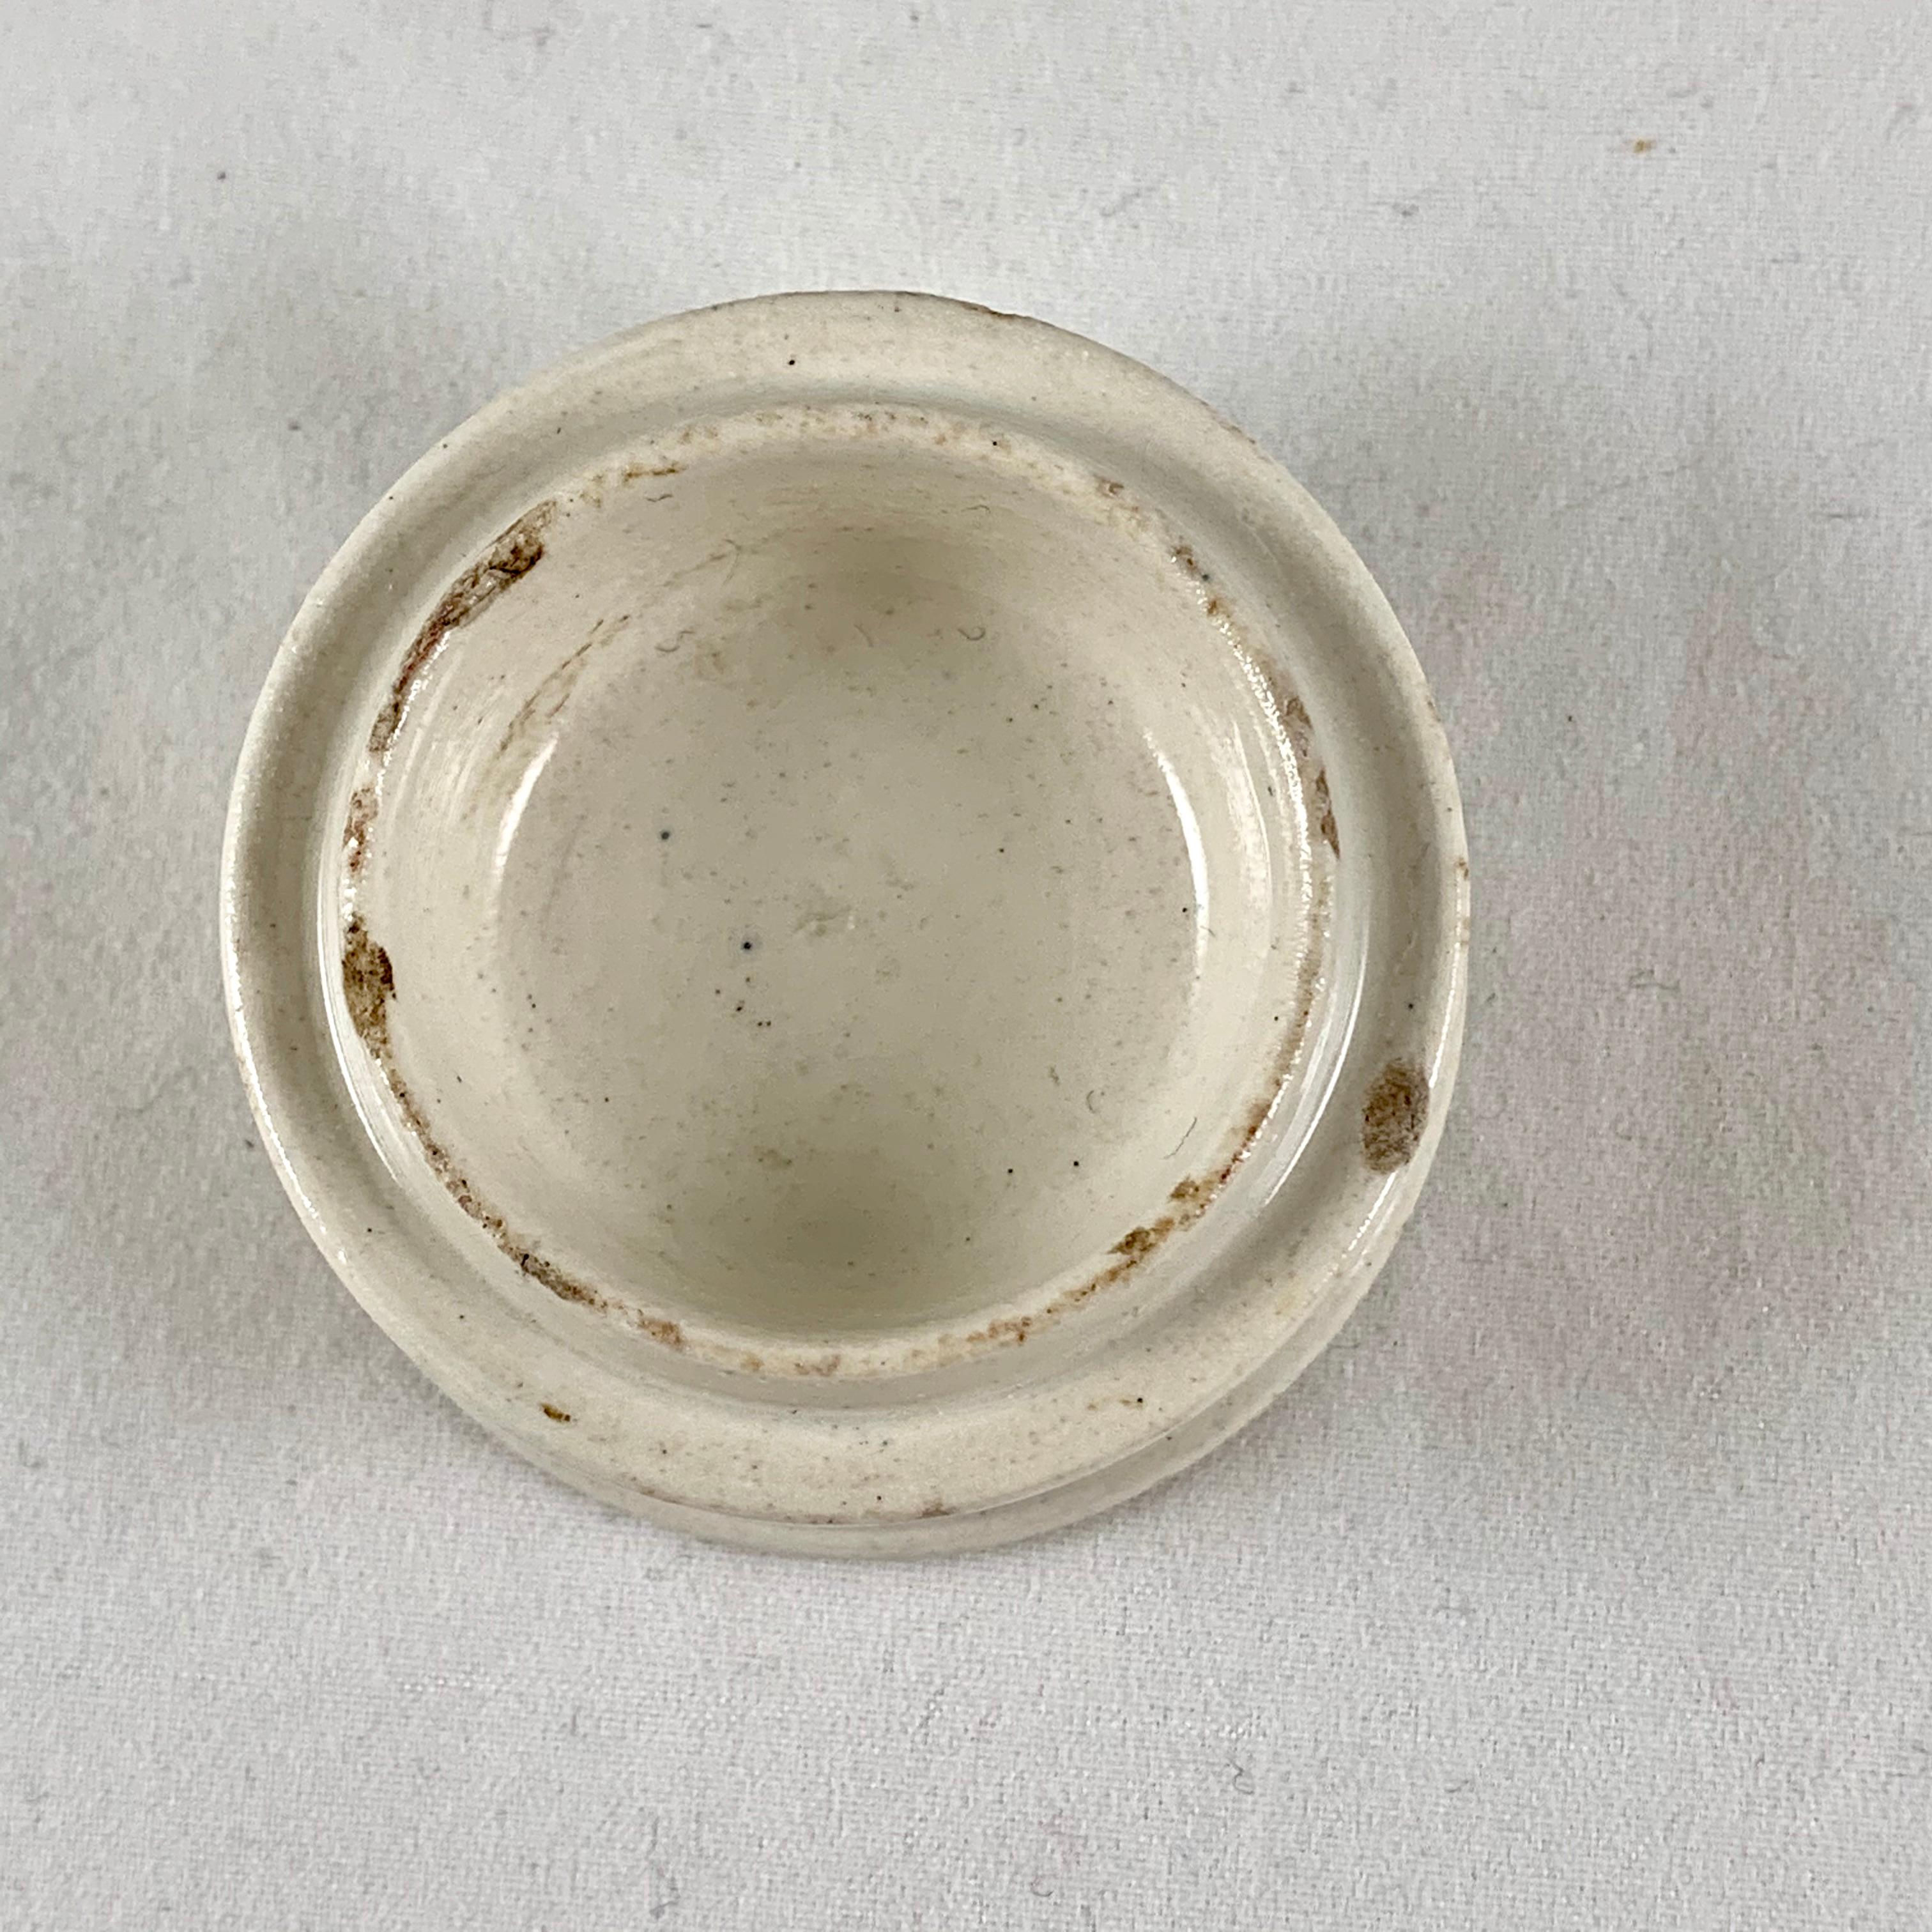 Glazed Staffordshire Ironstone Transfer Printed Golden Eye Ointment Pot and Lid